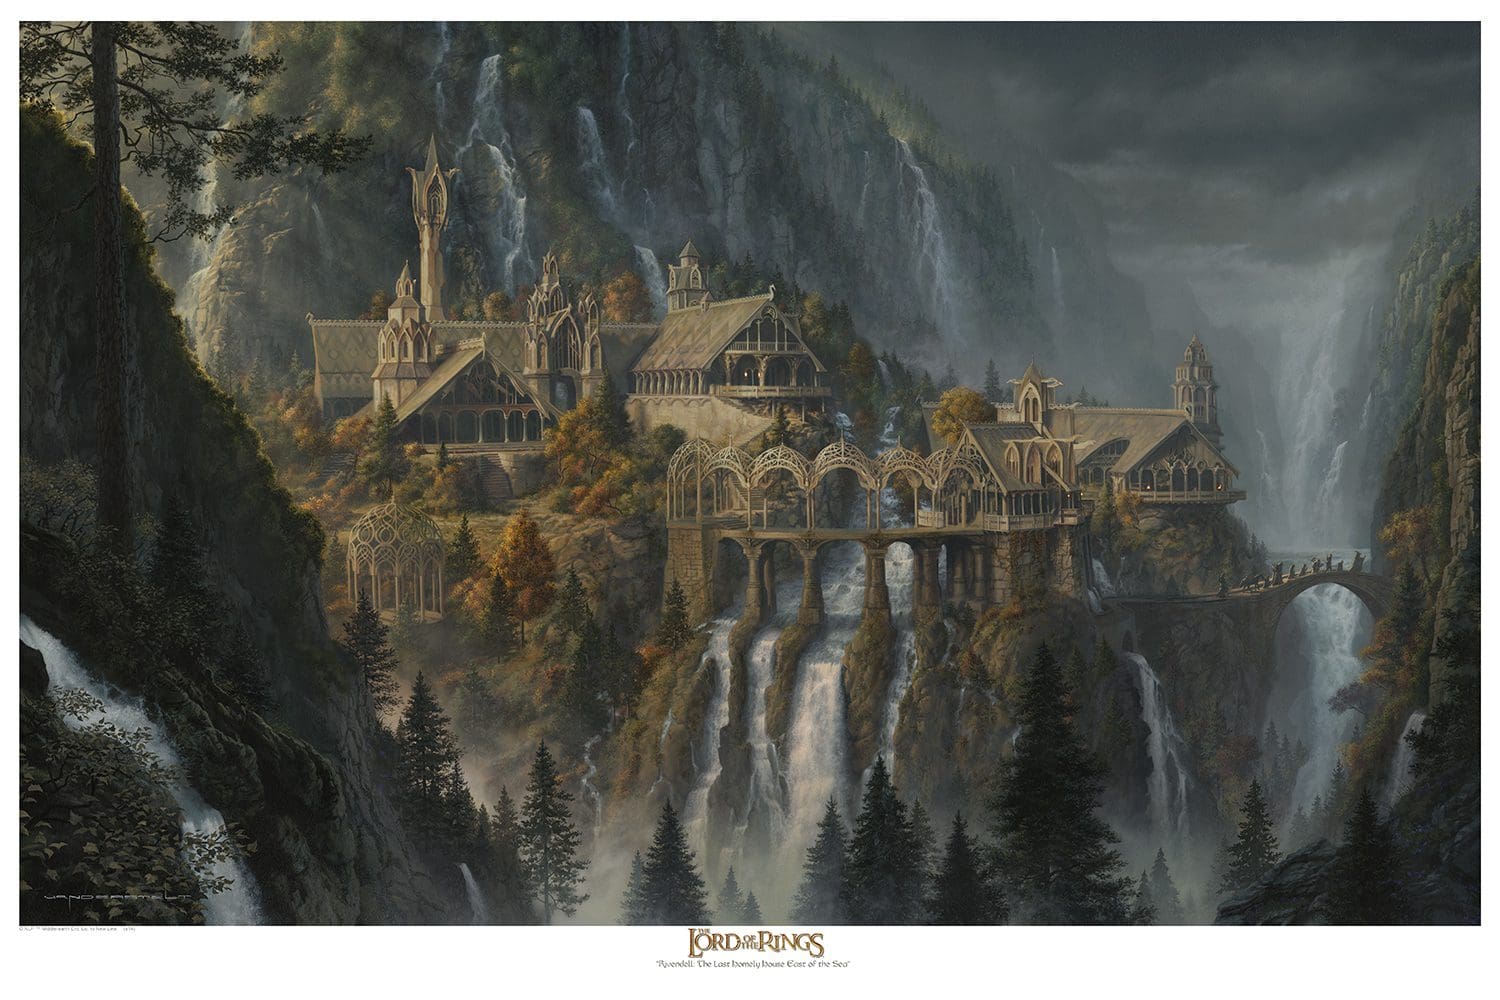 A painting of a castle in the middle of a waterfall.